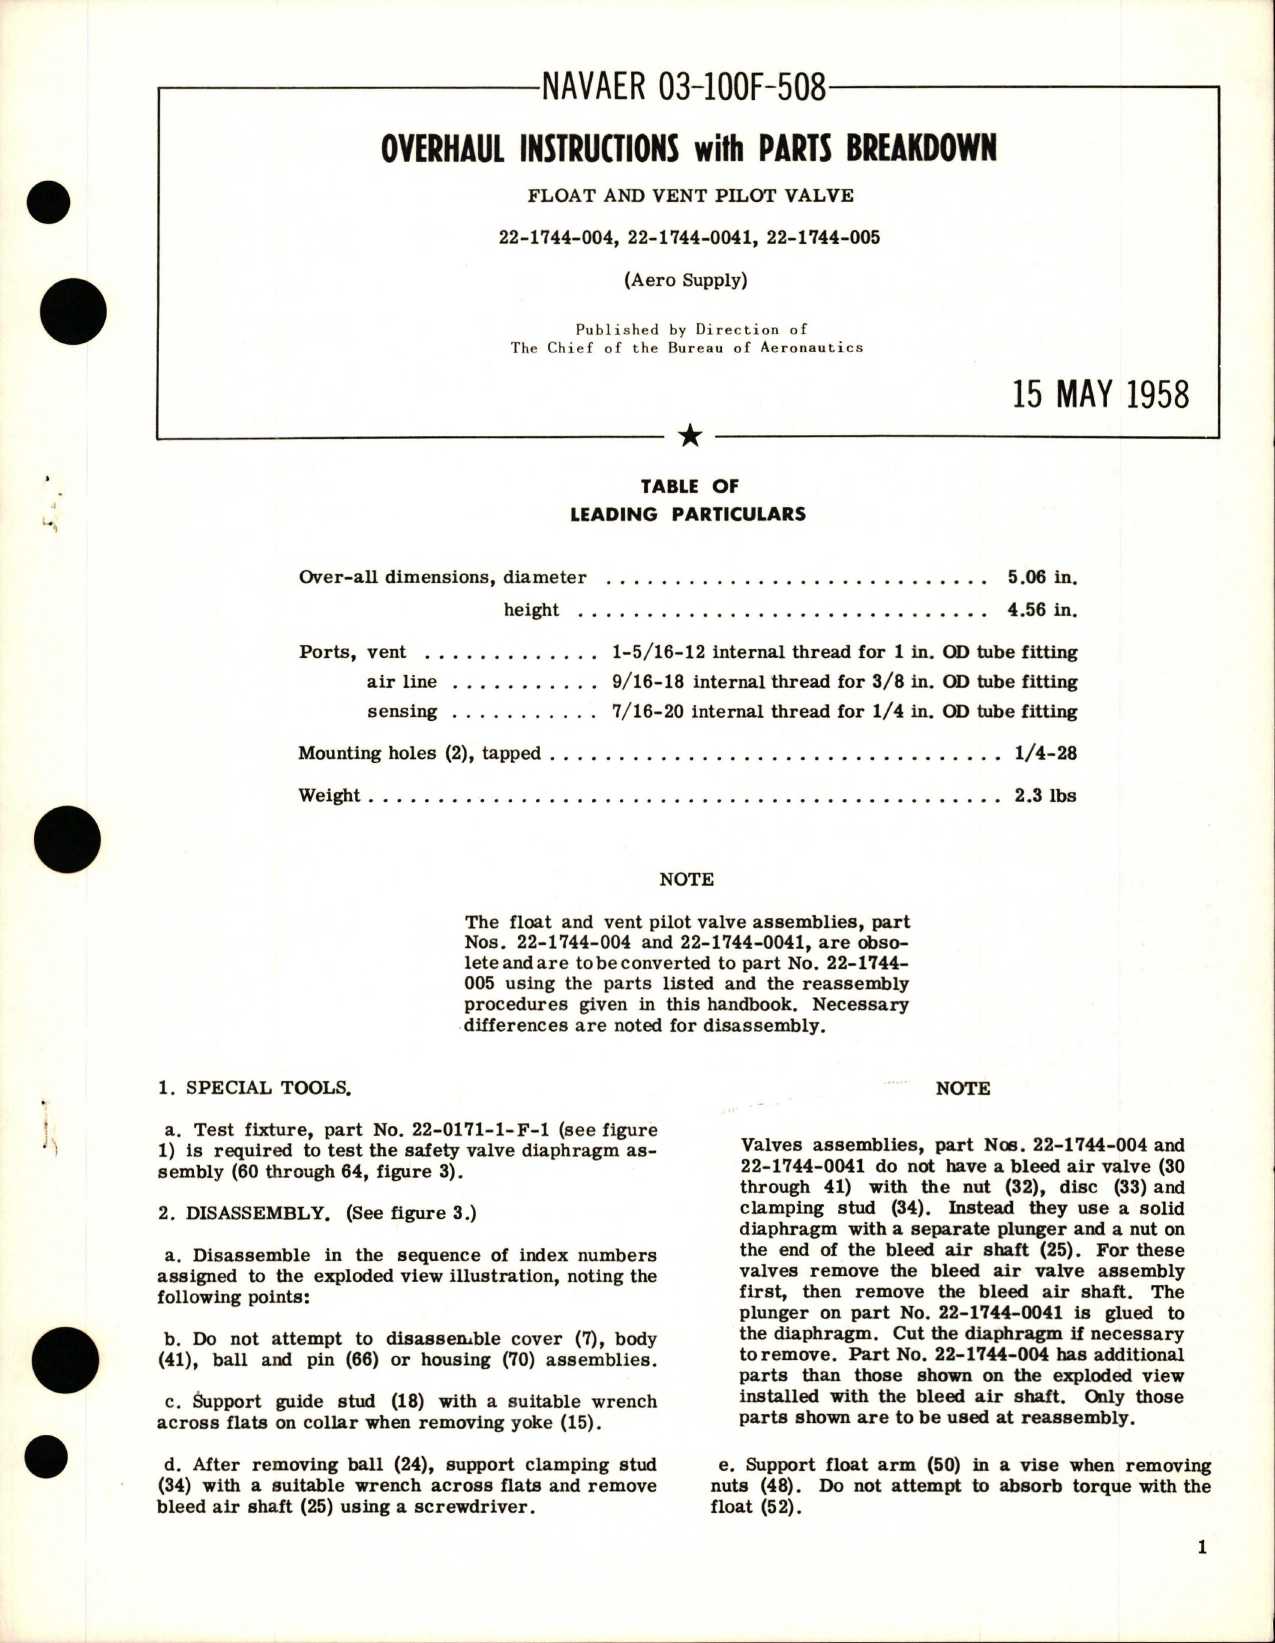 Sample page 1 from AirCorps Library document: Overhaul Instructions with Parts Breakdown for Float and Vent Pilot Valve - Parts 22-1744-004, 22-1744-0041, and 22-1744-005